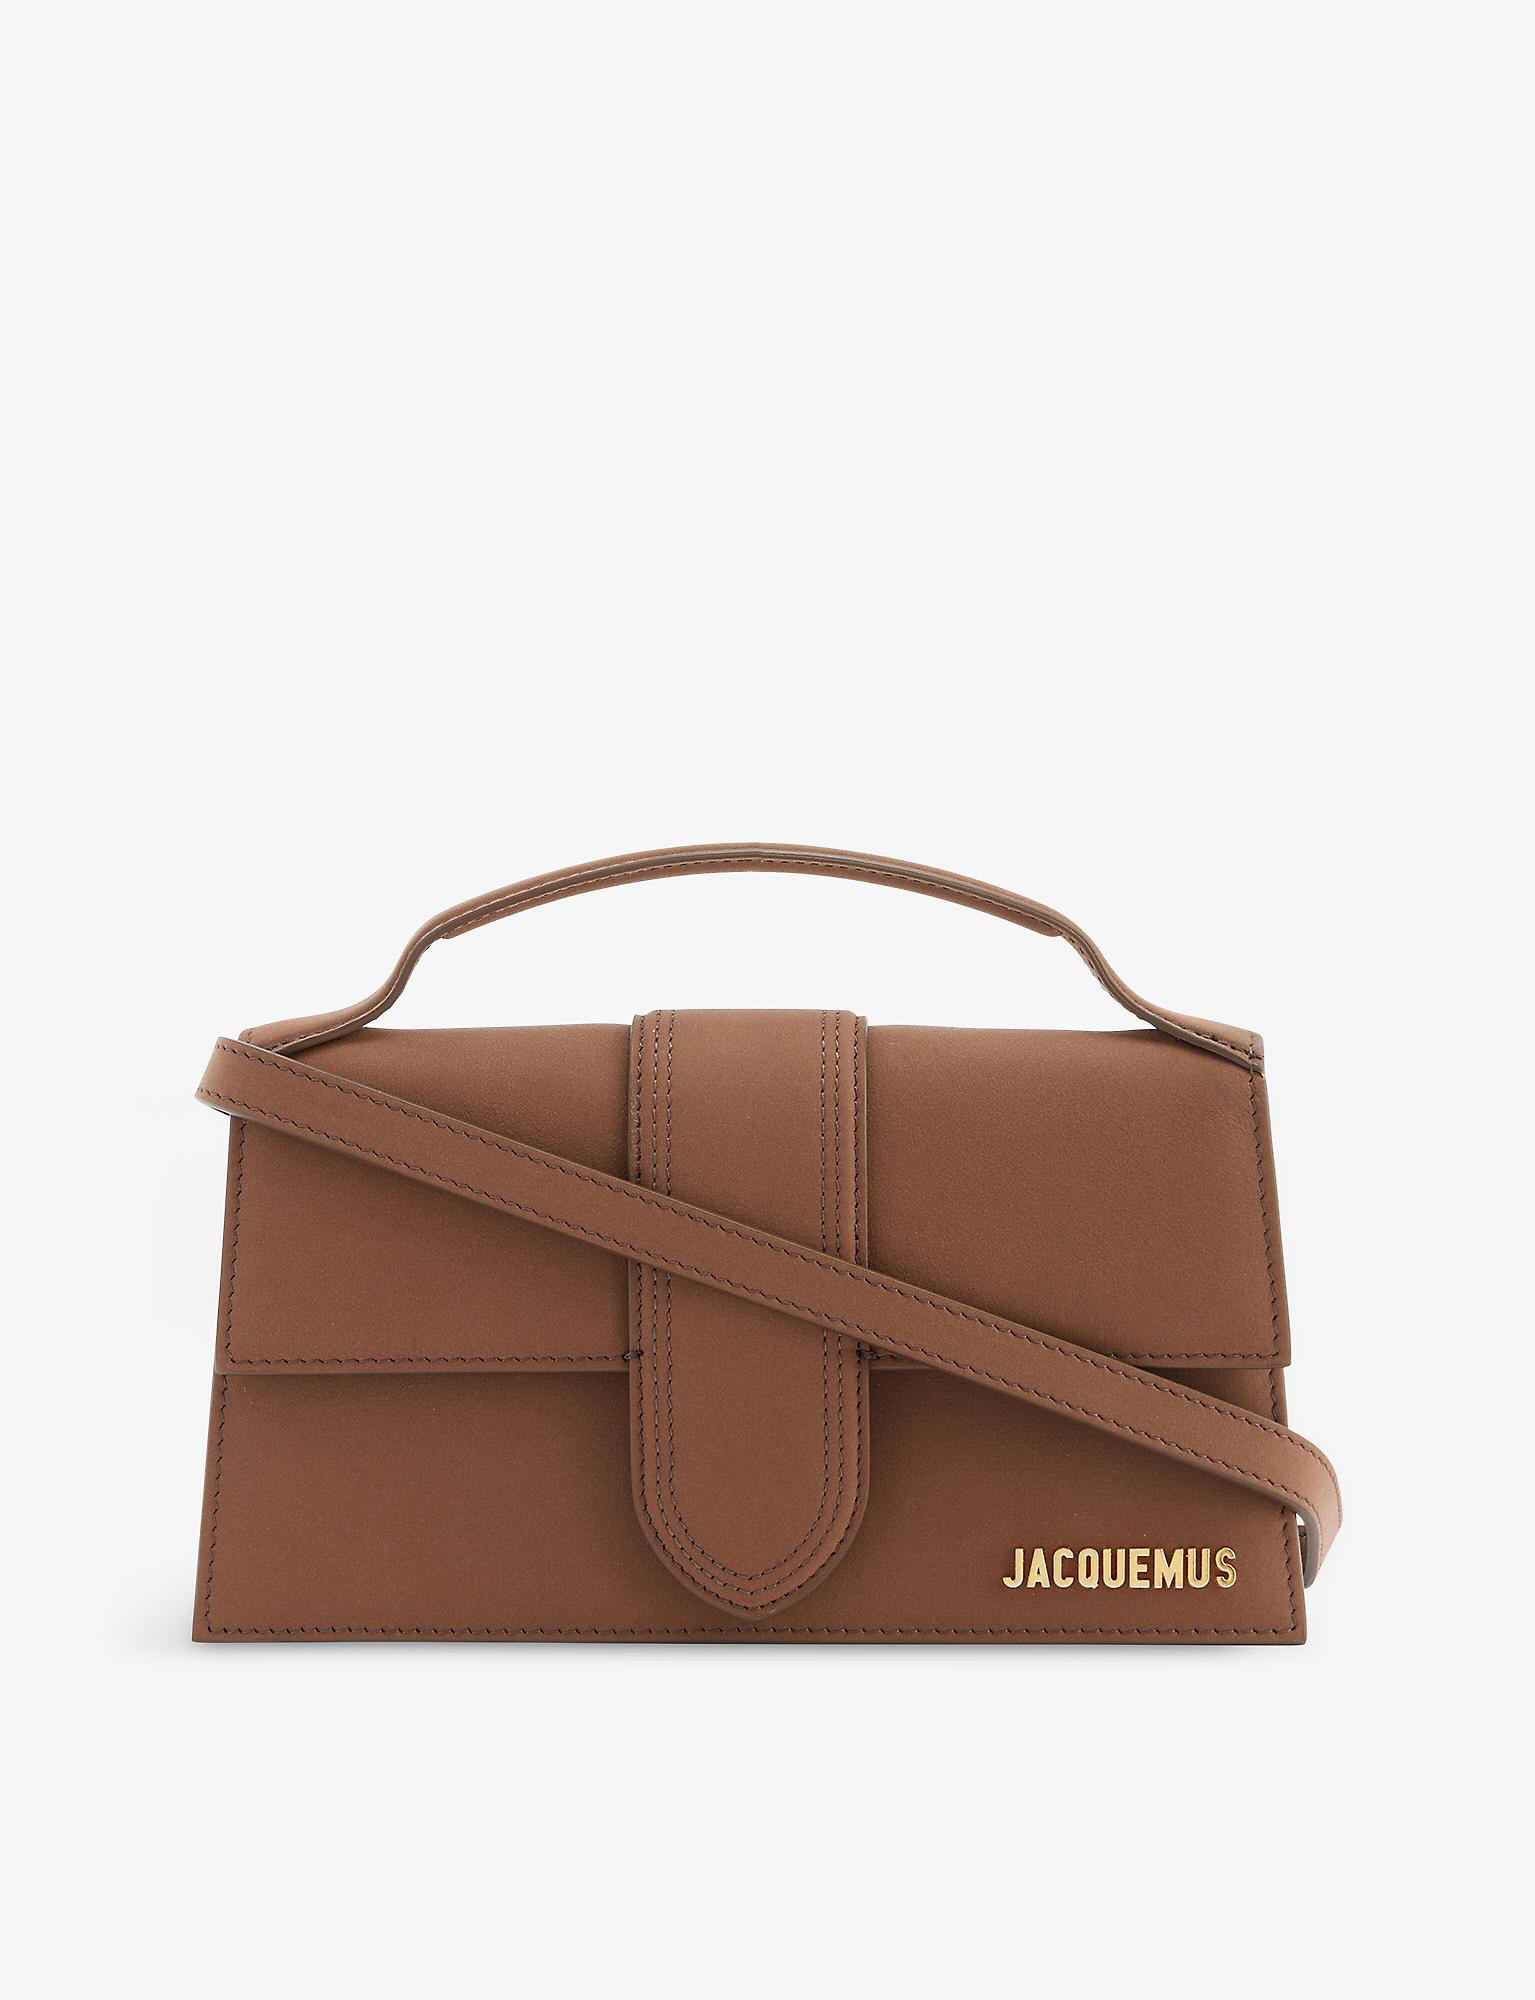 Jacquemus Le Grand Bambino Leather Top-handle Bag in Brown | Lyst